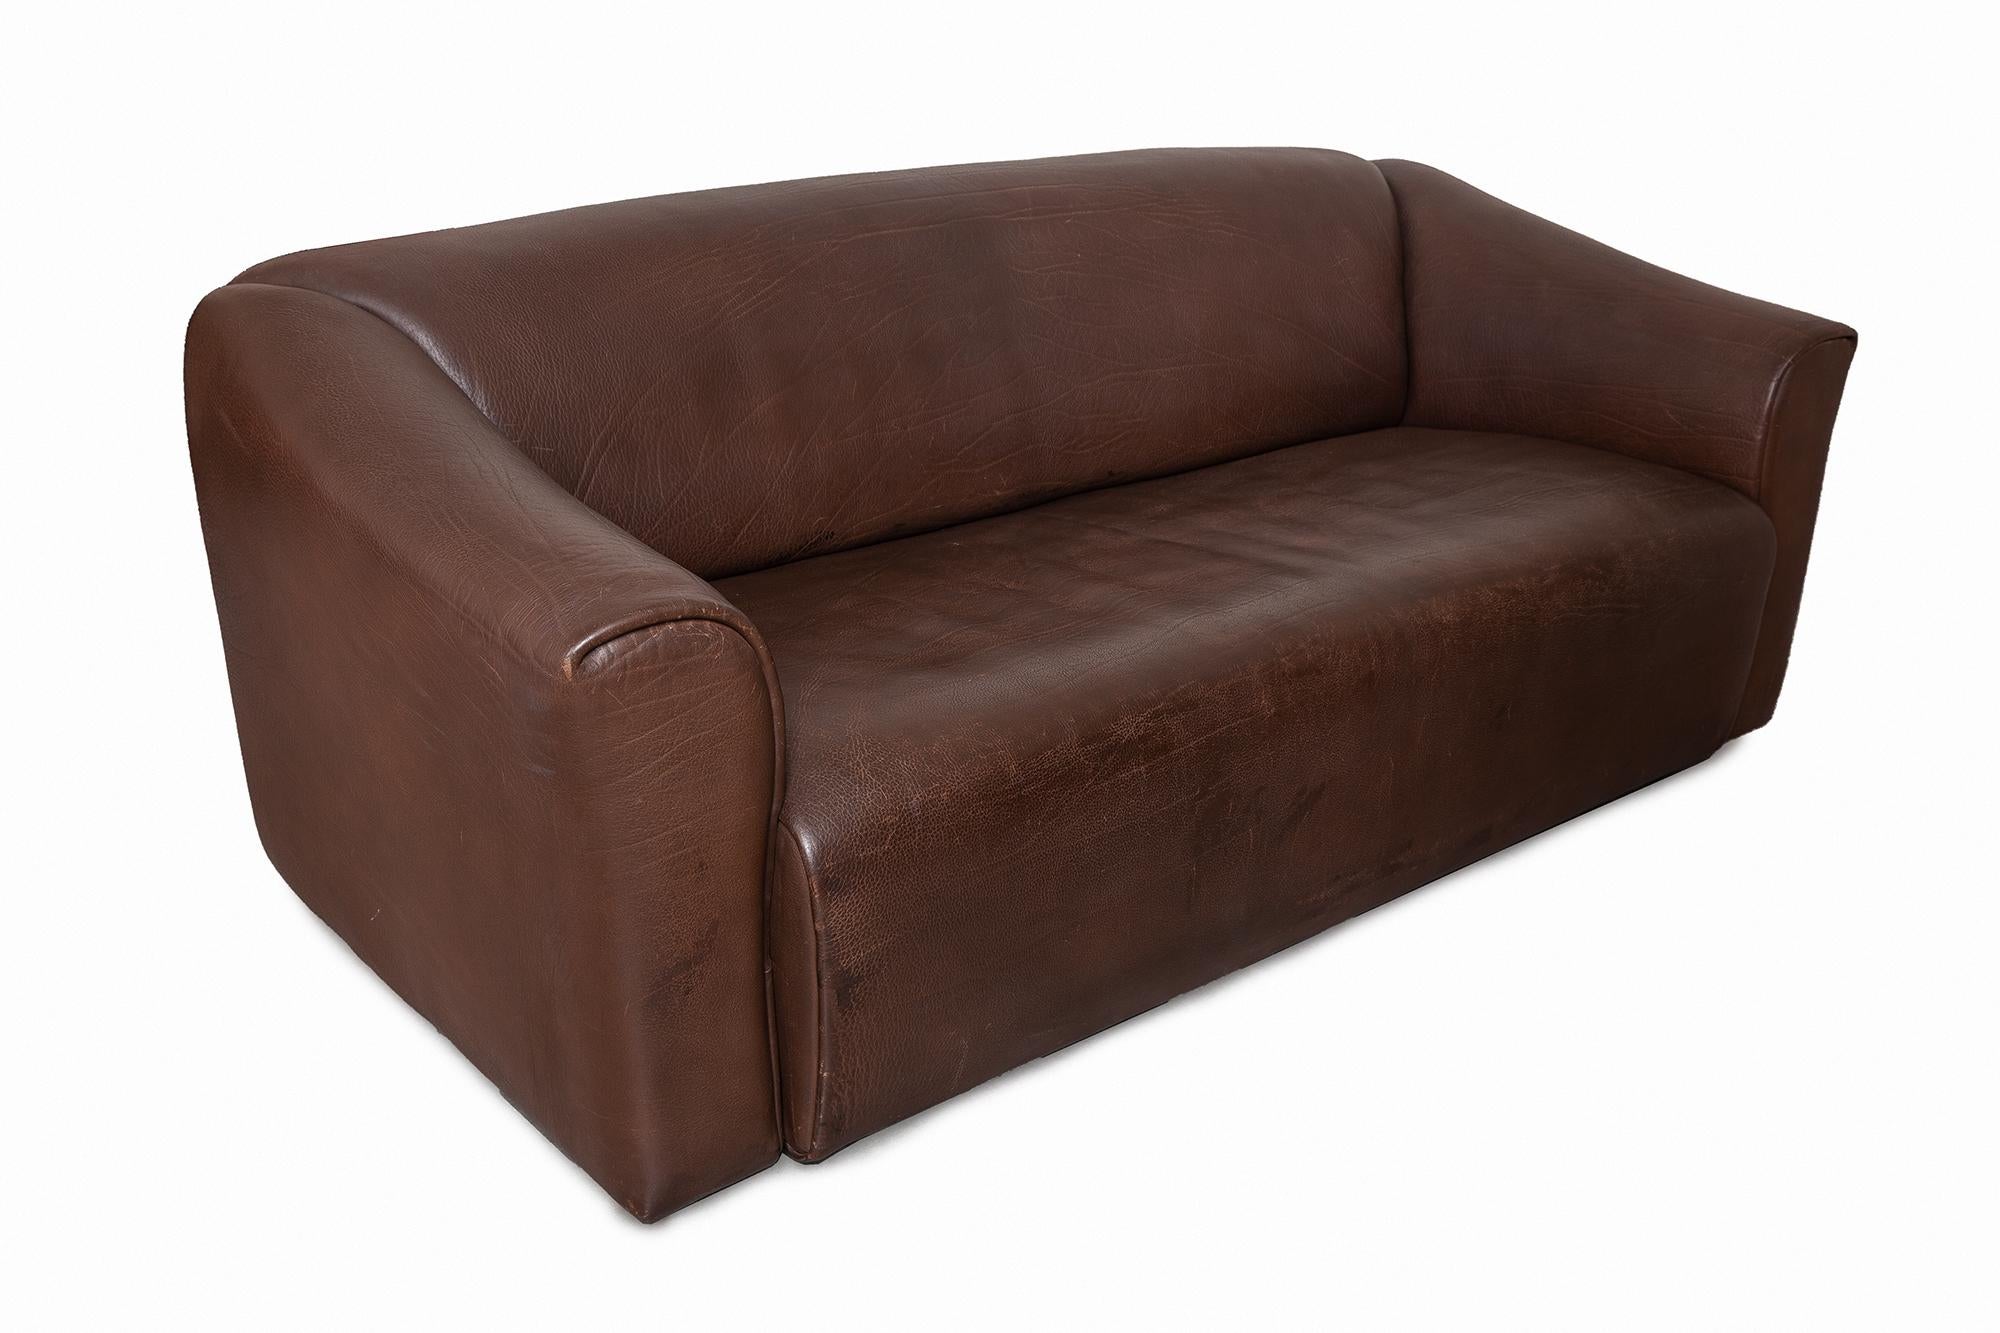 “DS-47” sofa by De Sede, Switzerland, 1970s. Made of thick bull leather which is laid in one piece and folded over the frame. Chocolate brown leather in great condition. The sofa has the incredible ability to increase your comfort with the seating